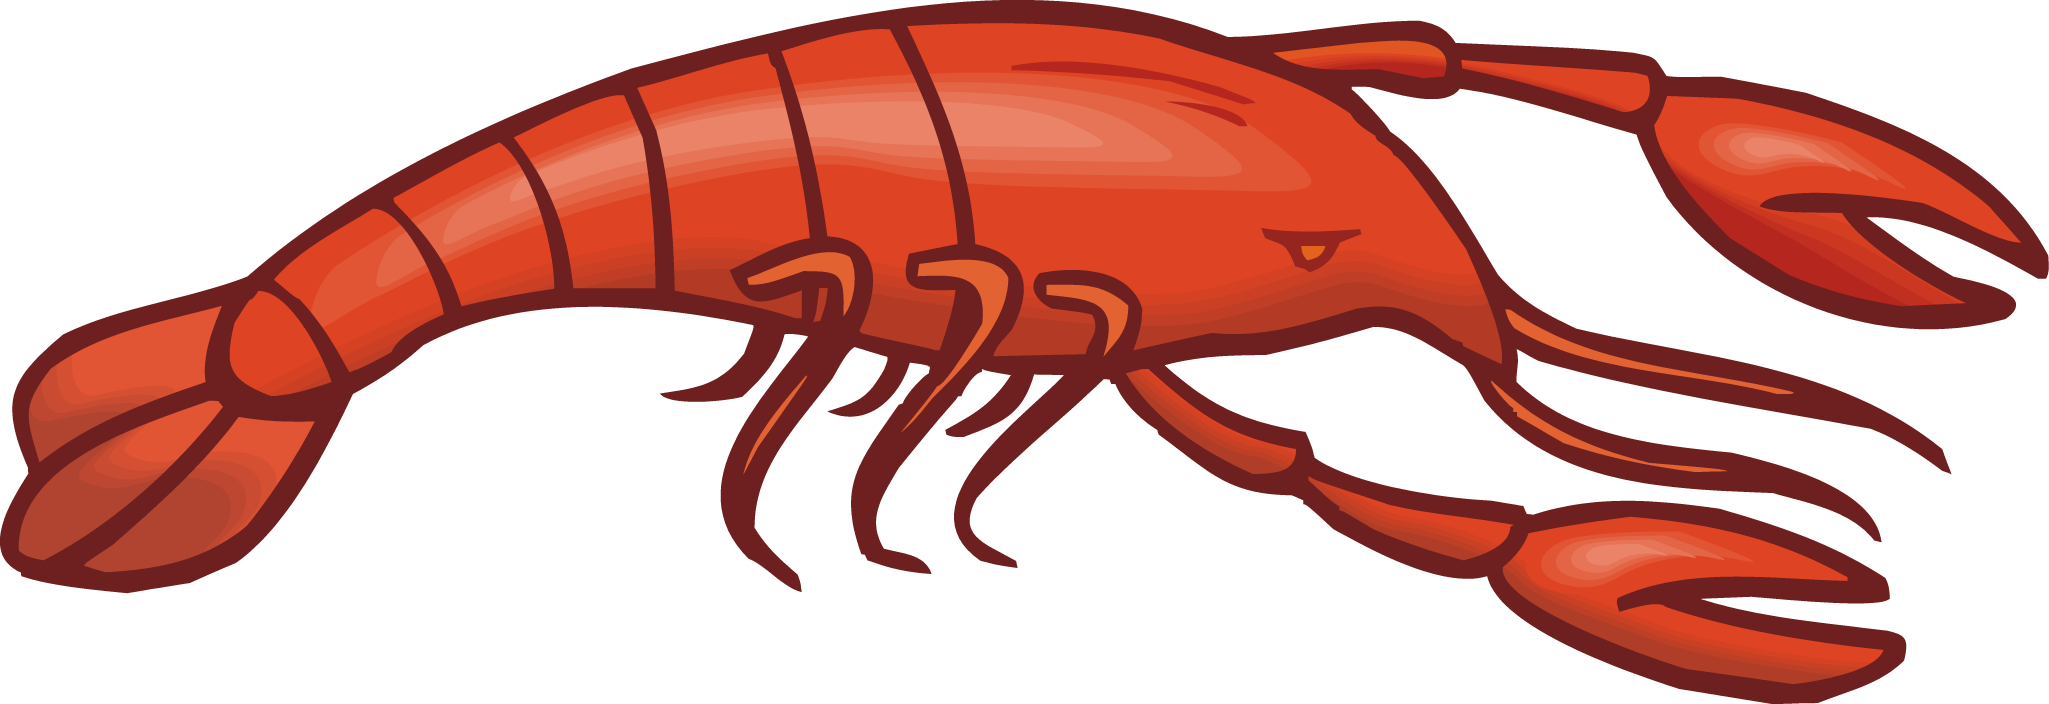 Crayfish Drawing Colouring Pages Clipart - Free to use Clip Art ...